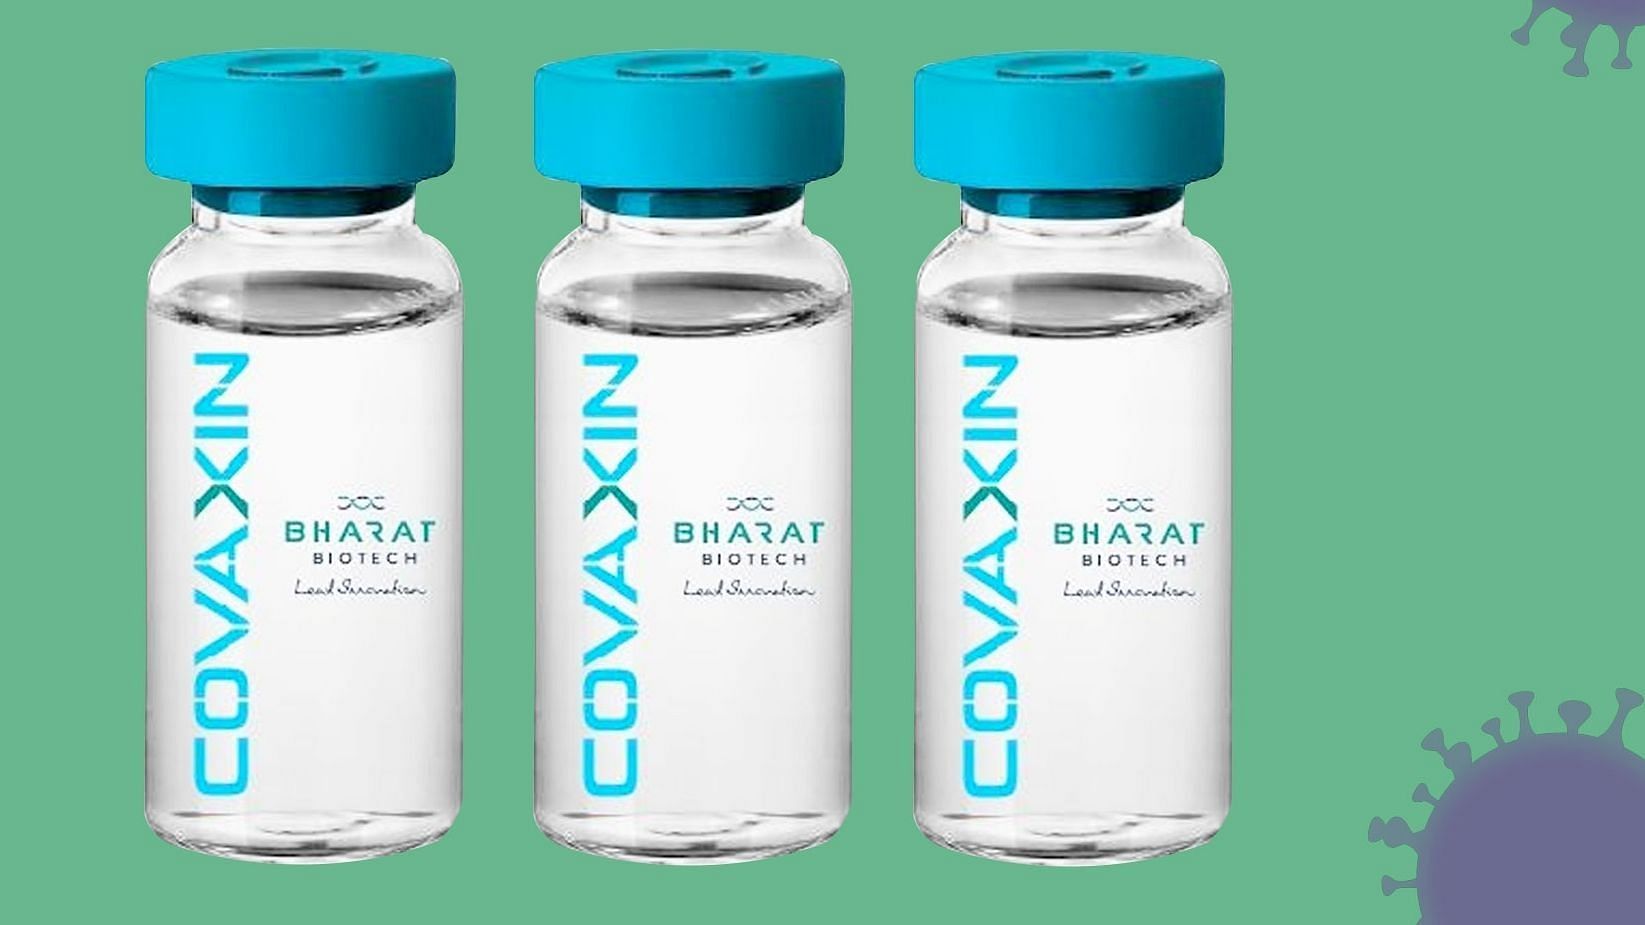 Sai Prasad, Executive Director, Bharat Biotech had told IANS in November that Covaxin was found to be safe without any major adverse events in the first two stages of the trials.